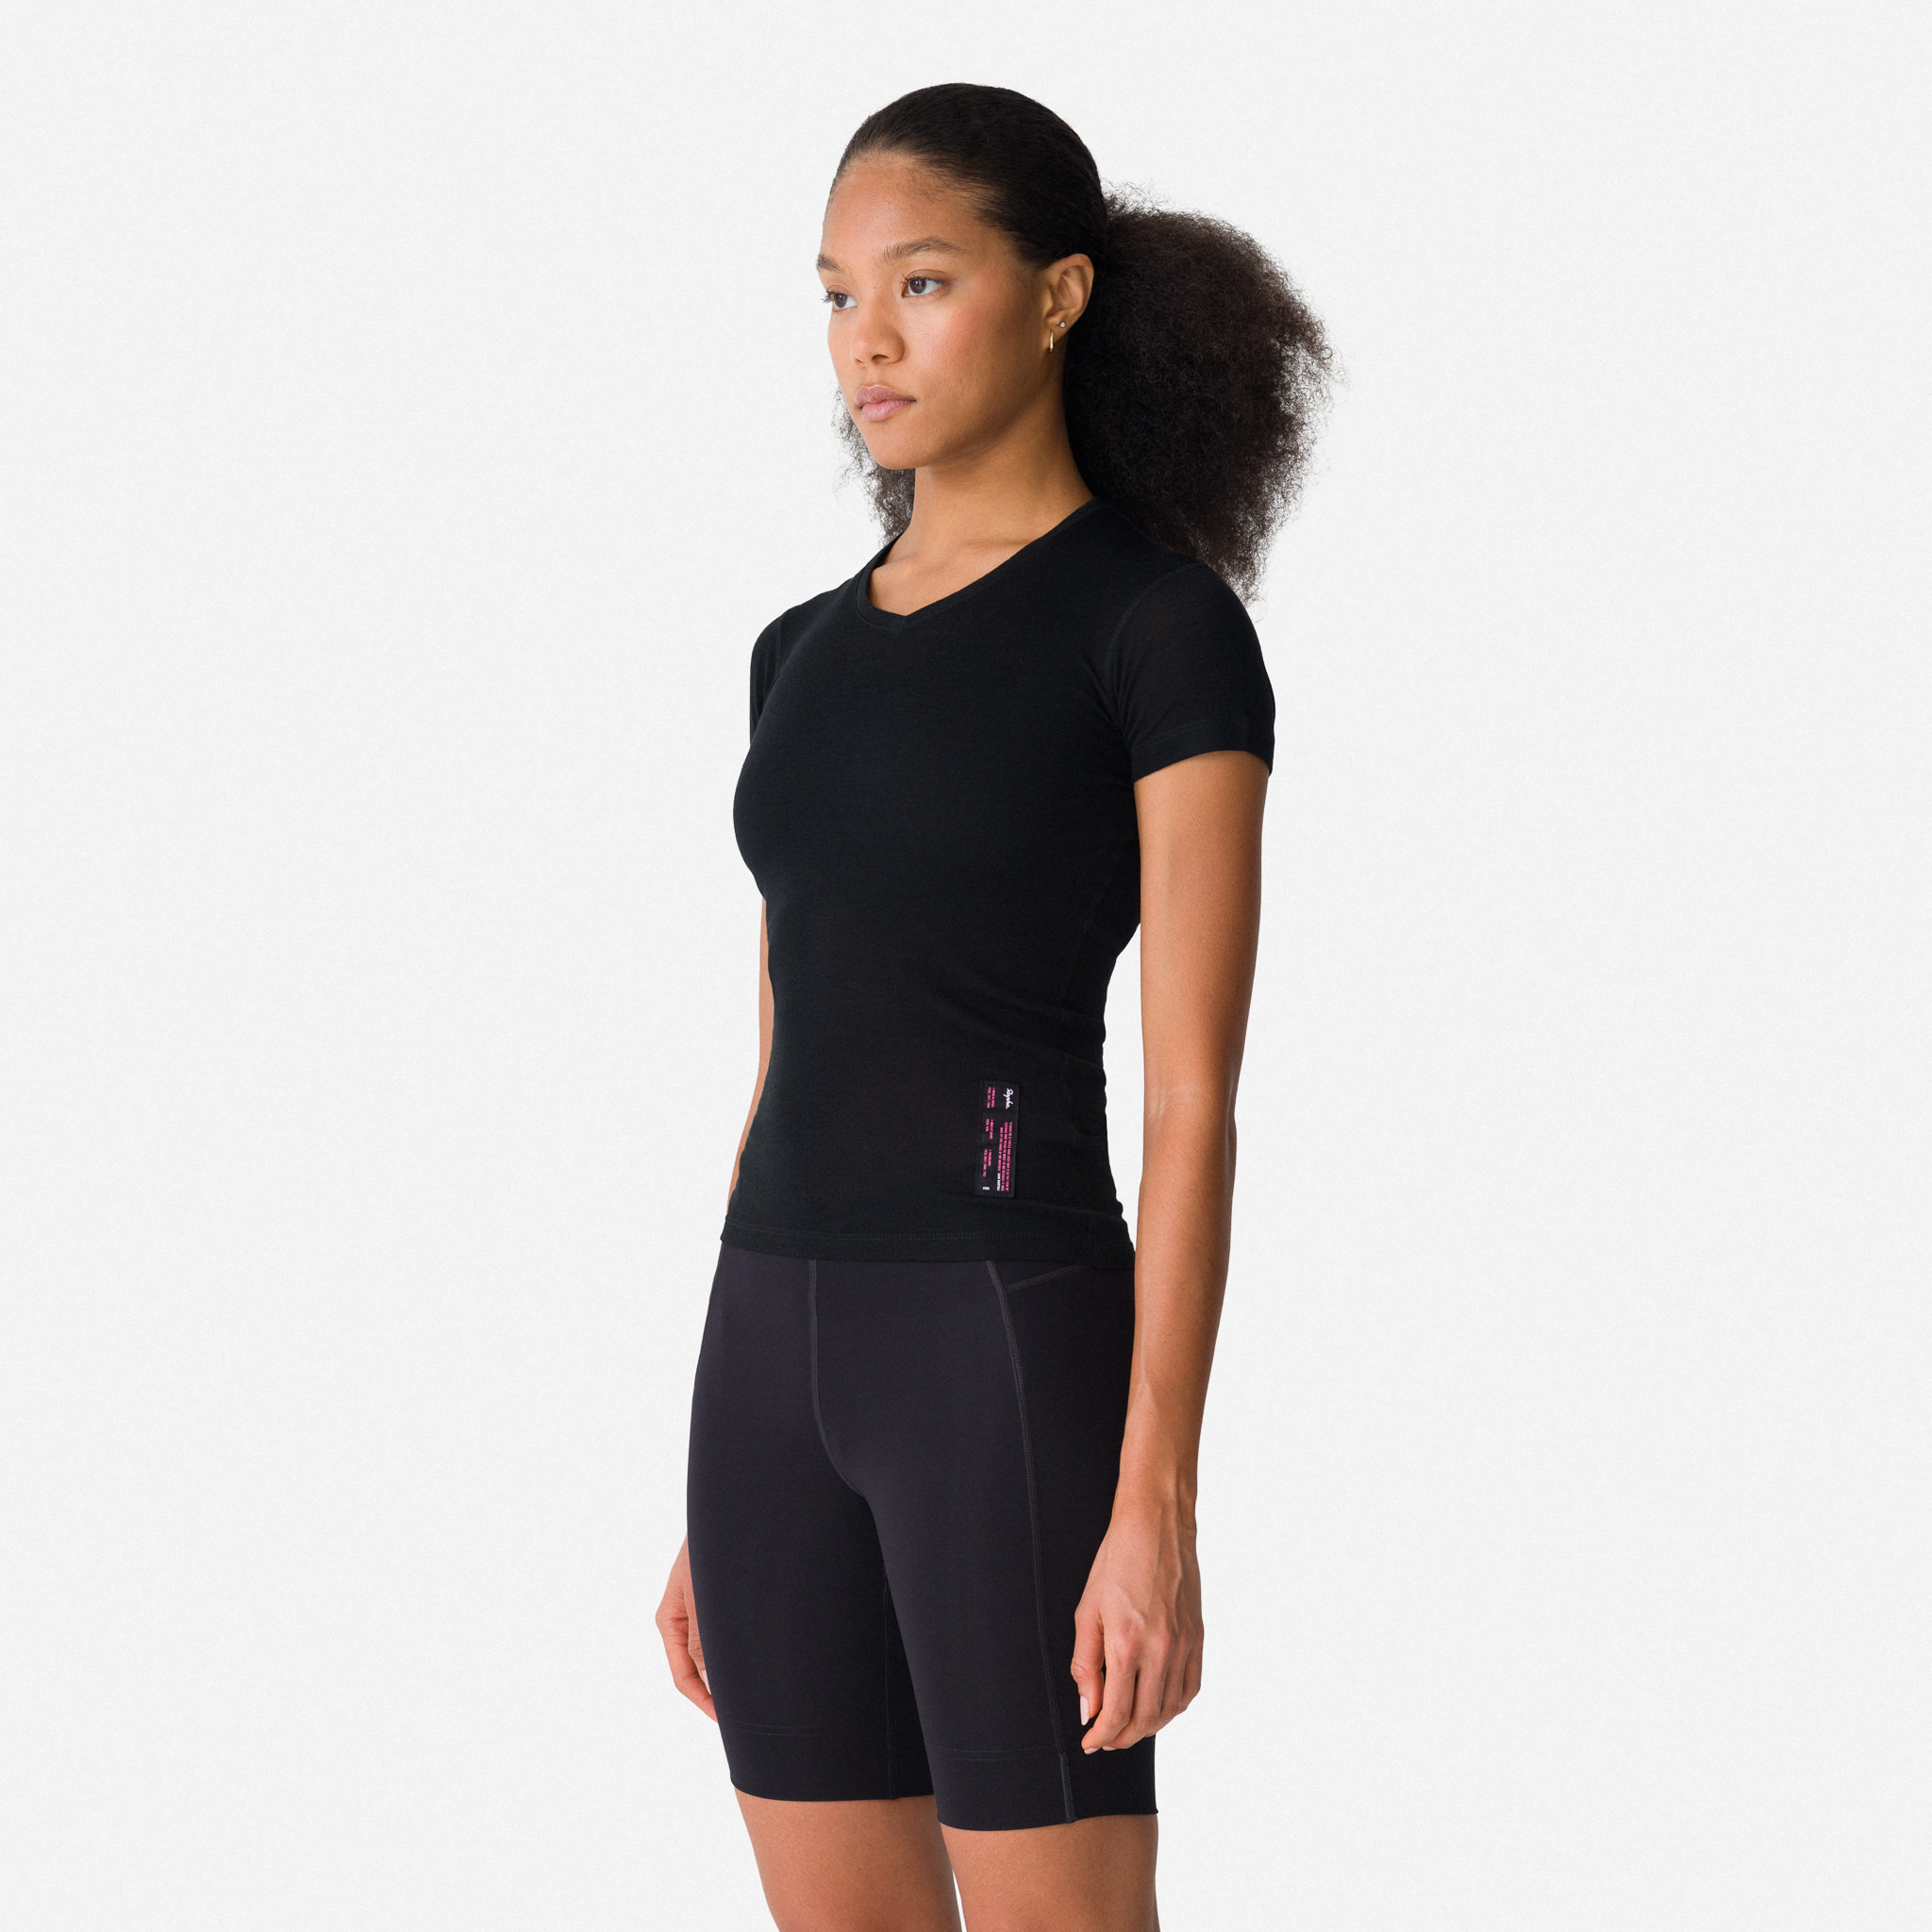 Women's Merino Base Layer - Short Sleeve, Women's Merino Cycling Base Layer  for Cold Weather Riding